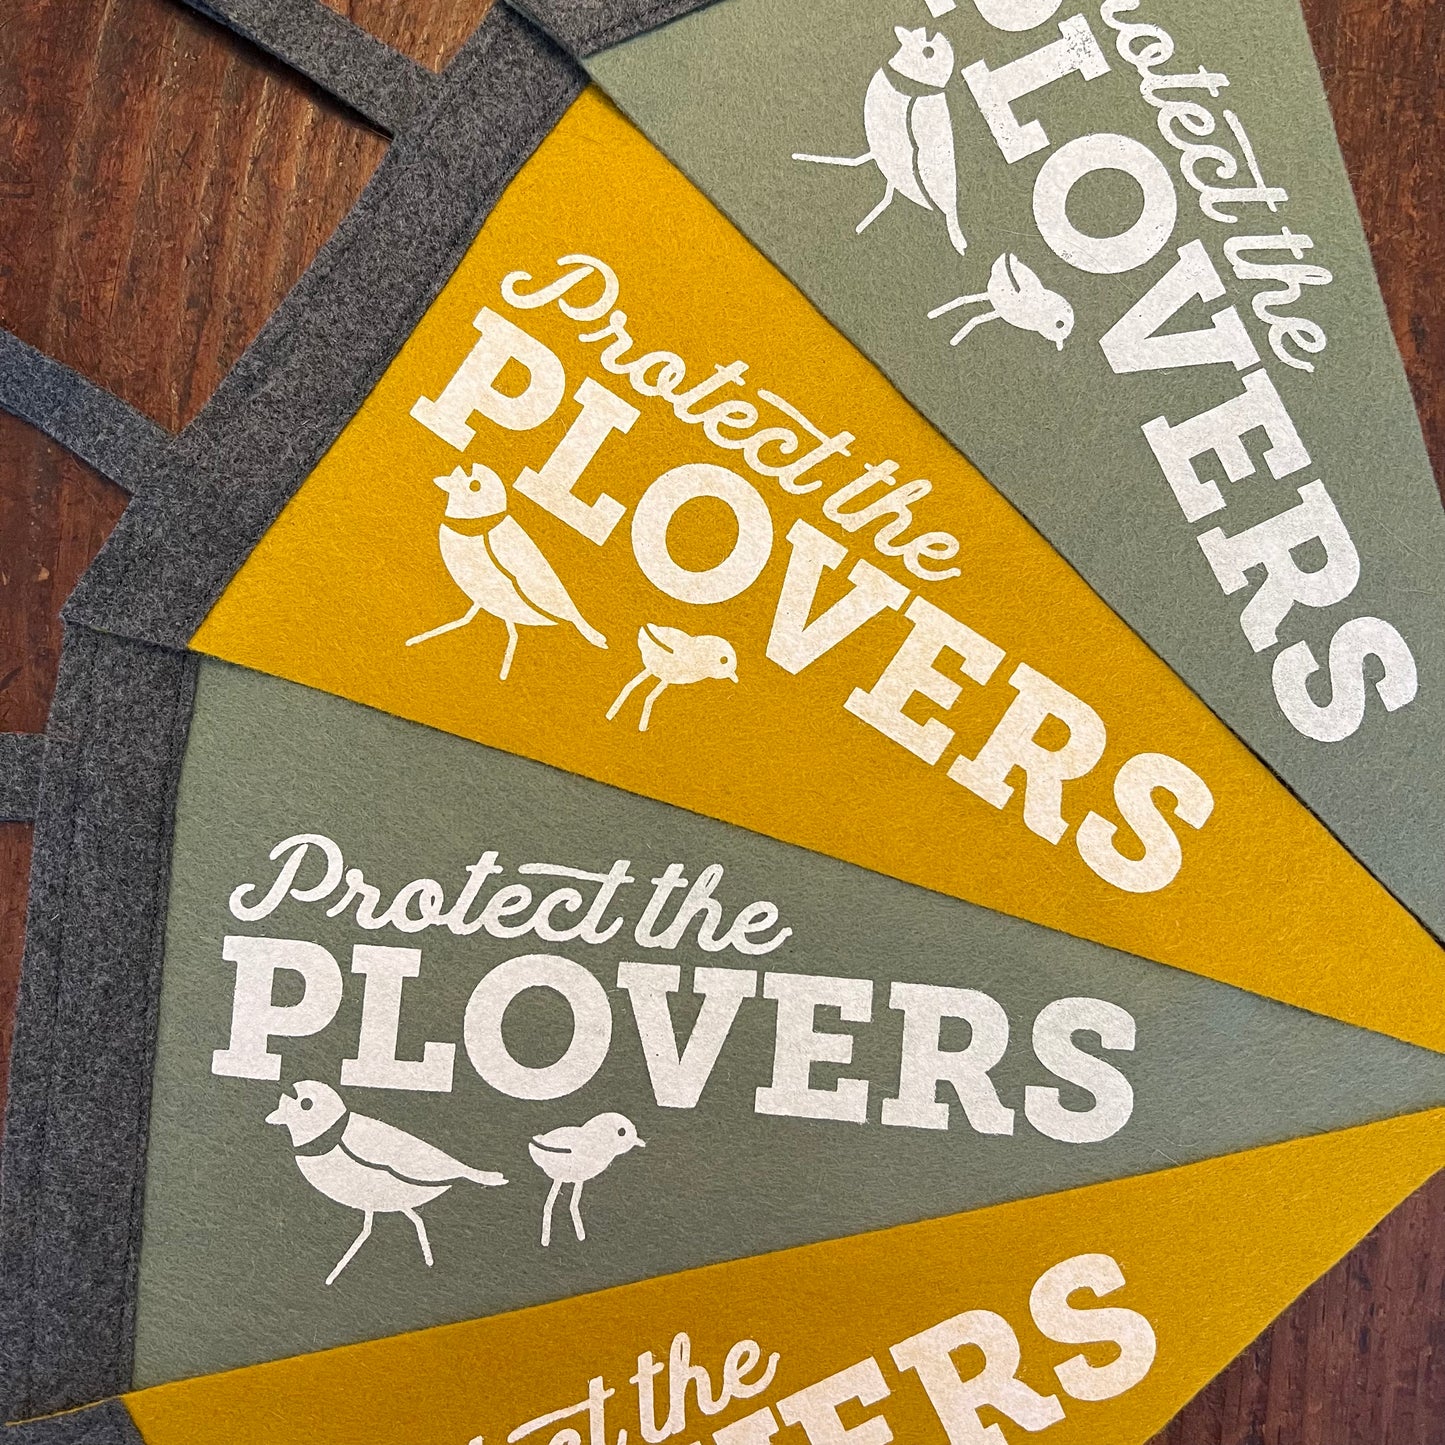 Protect the Plovers Felt Pennant - 6x12 inches